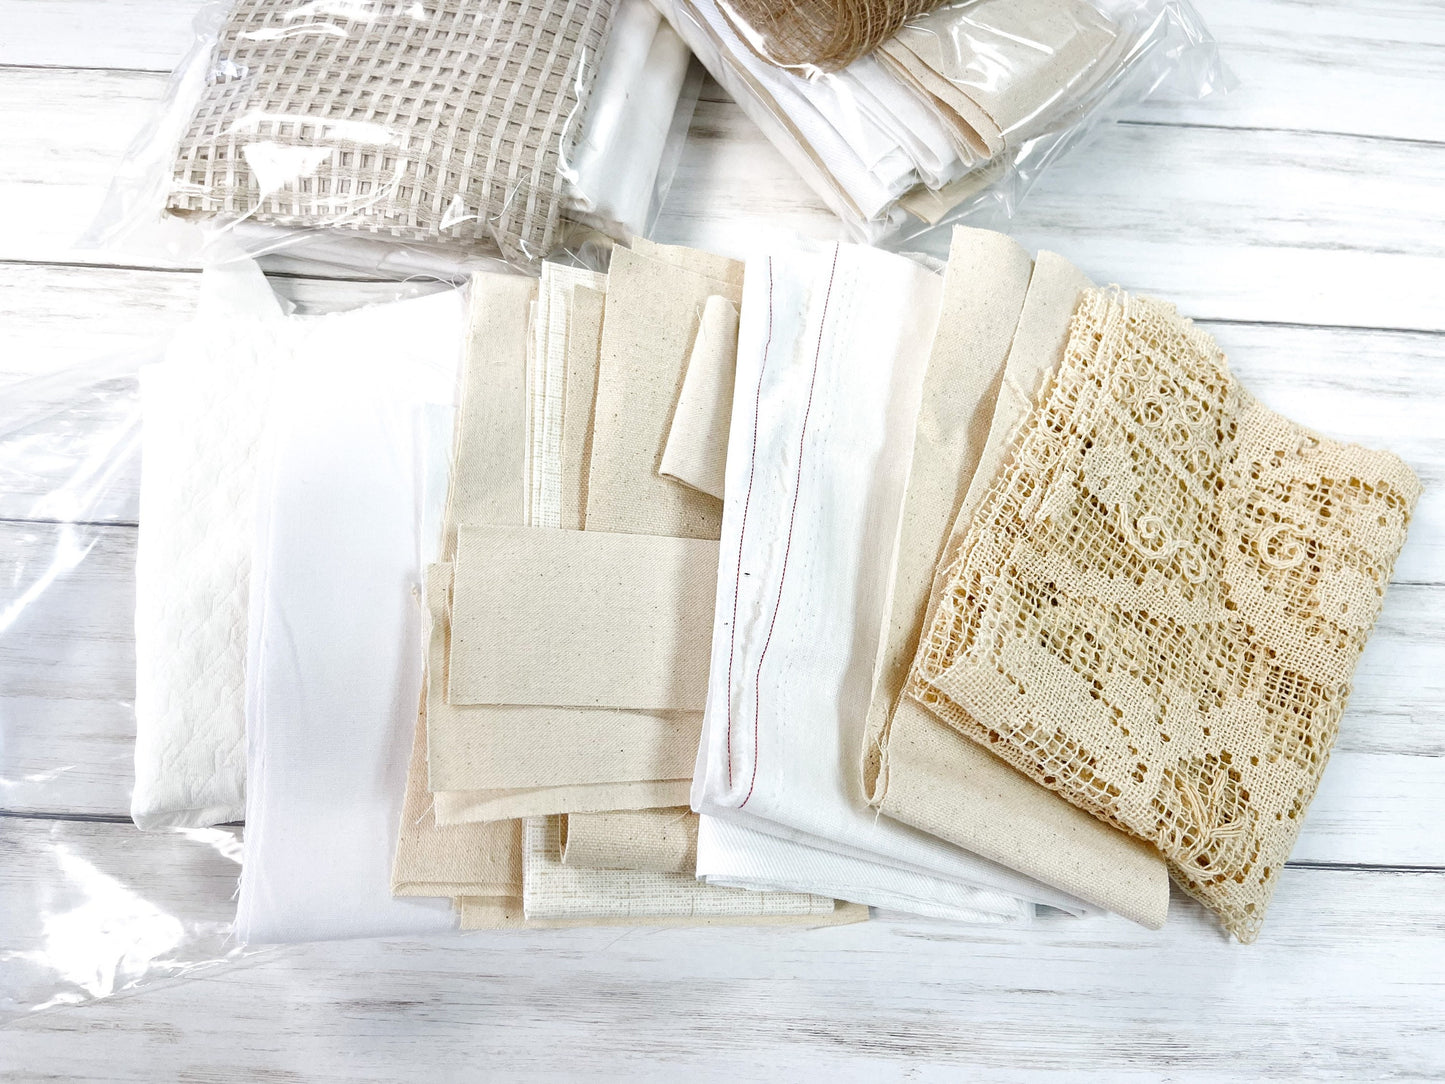 White and Cream Fabric Scraps for Journaling and Crafting, Craft Supplies